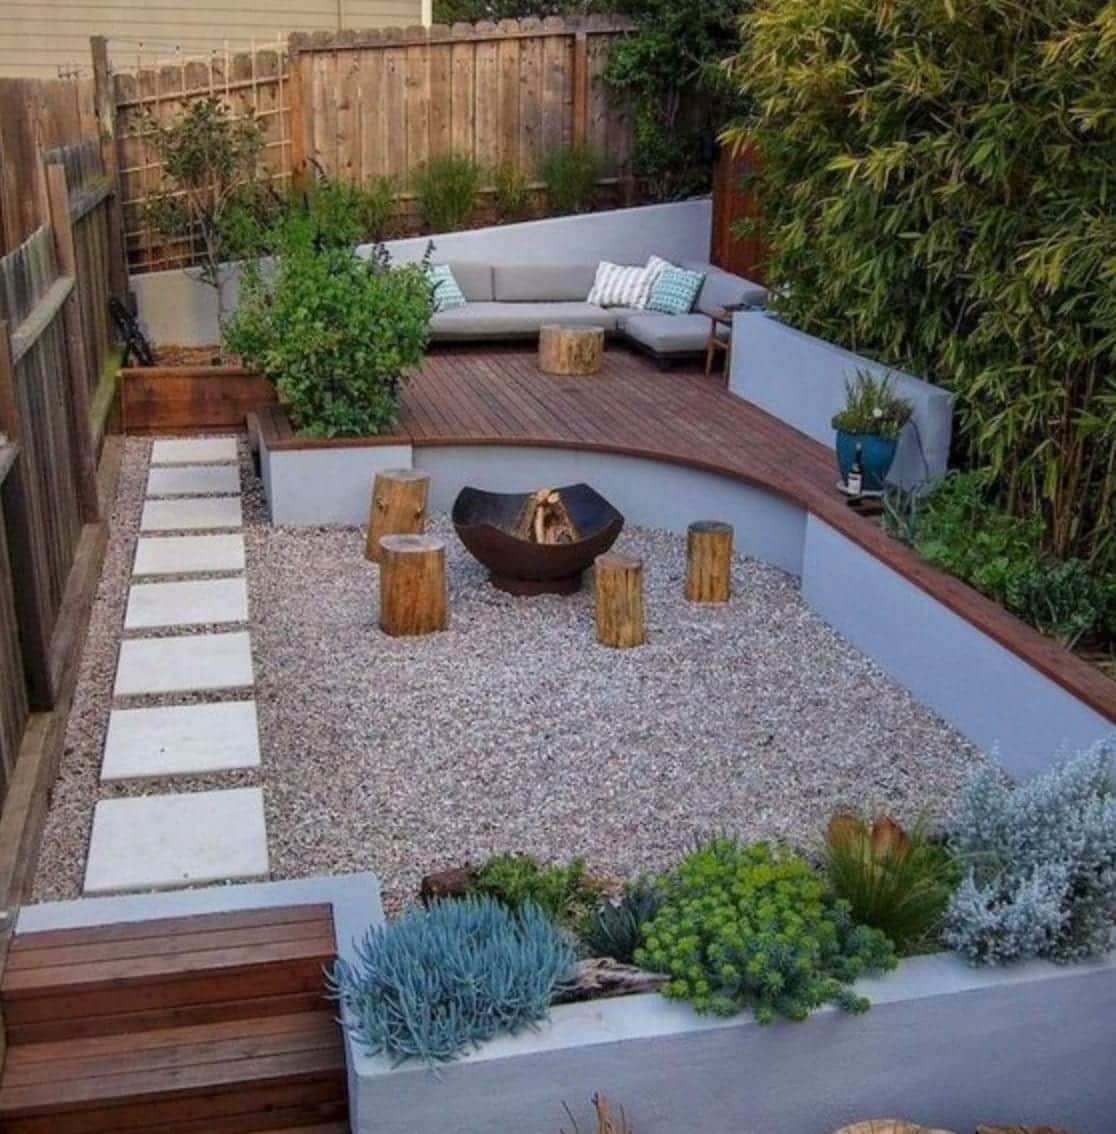 How to Make The Most Out of Your Small Yard (Landscaping Ideas) - ALD